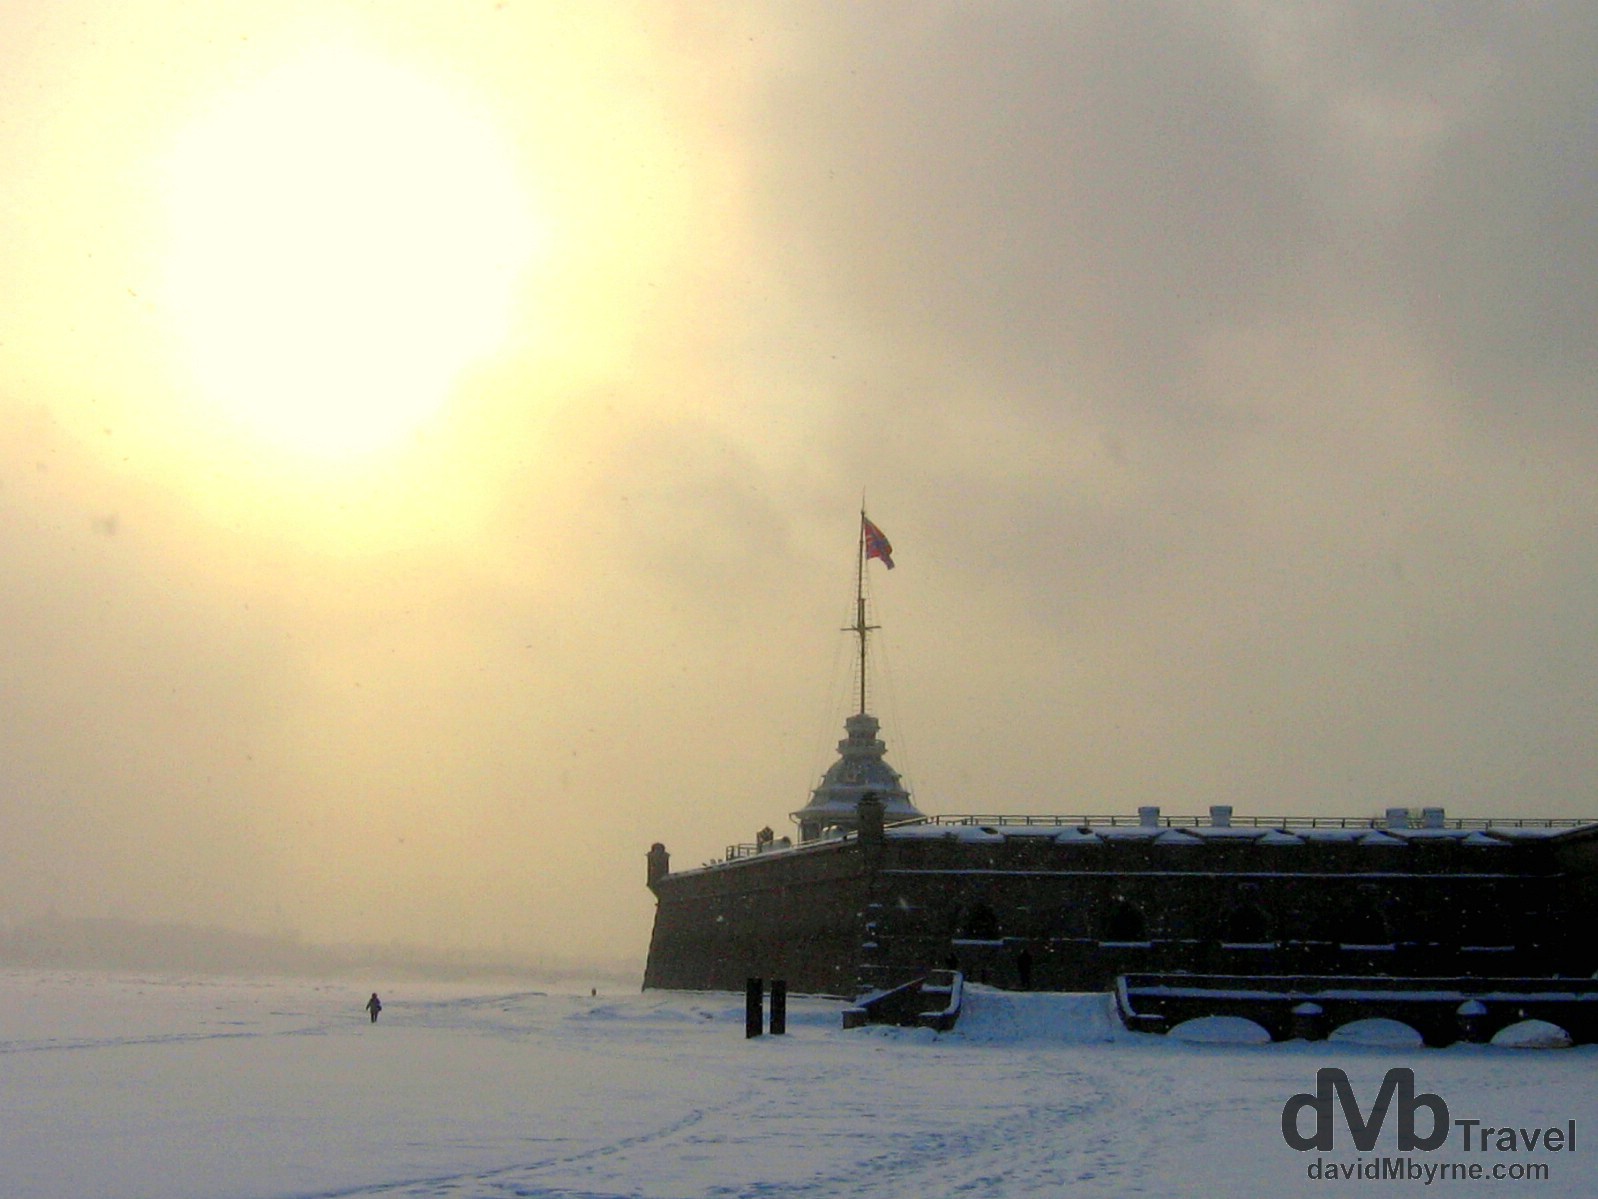 A snow blizzard outside the walls of the Peter & Paul Fortress in St. Petersburg, Russia. February 28, 2006.